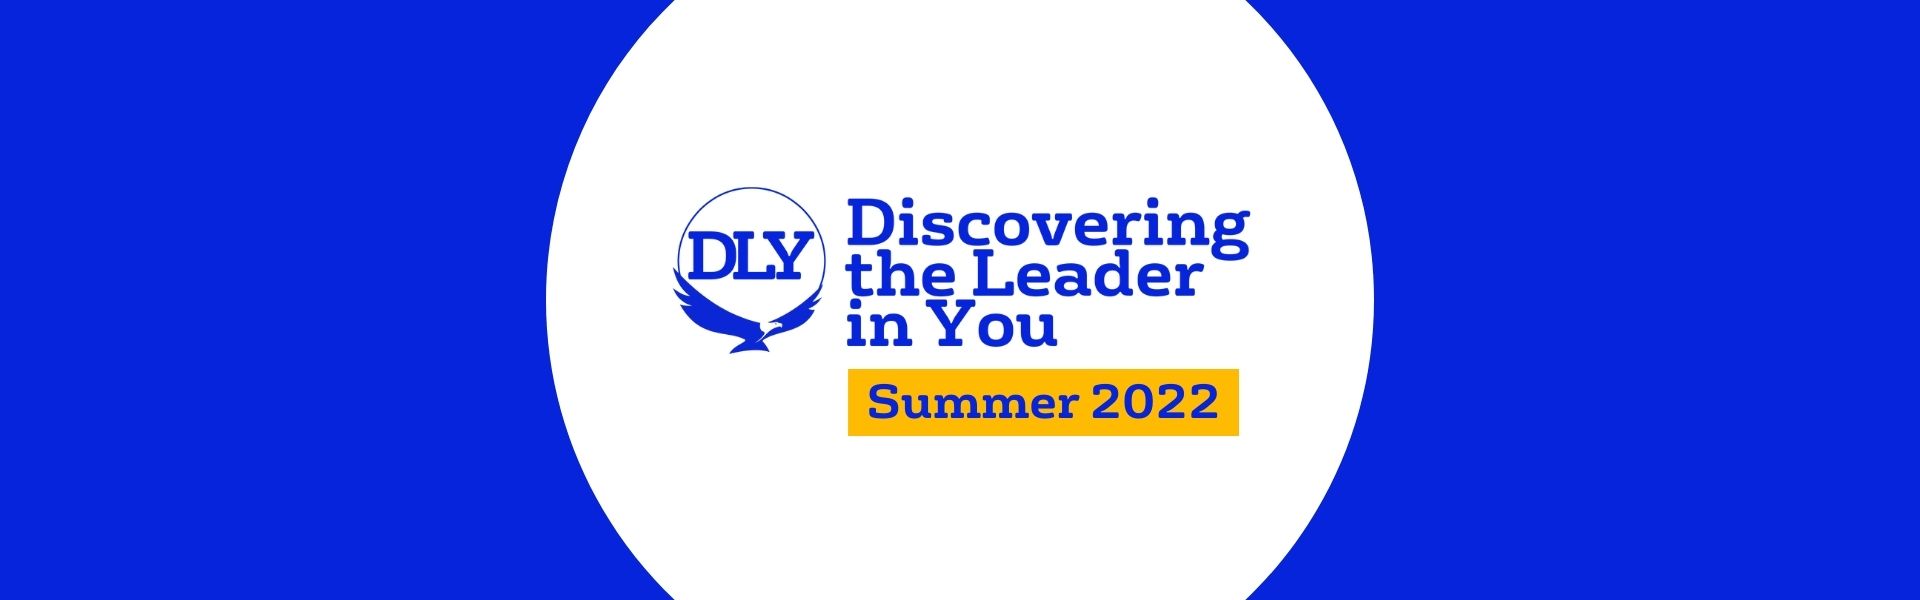 Discovering the leader in you 2022